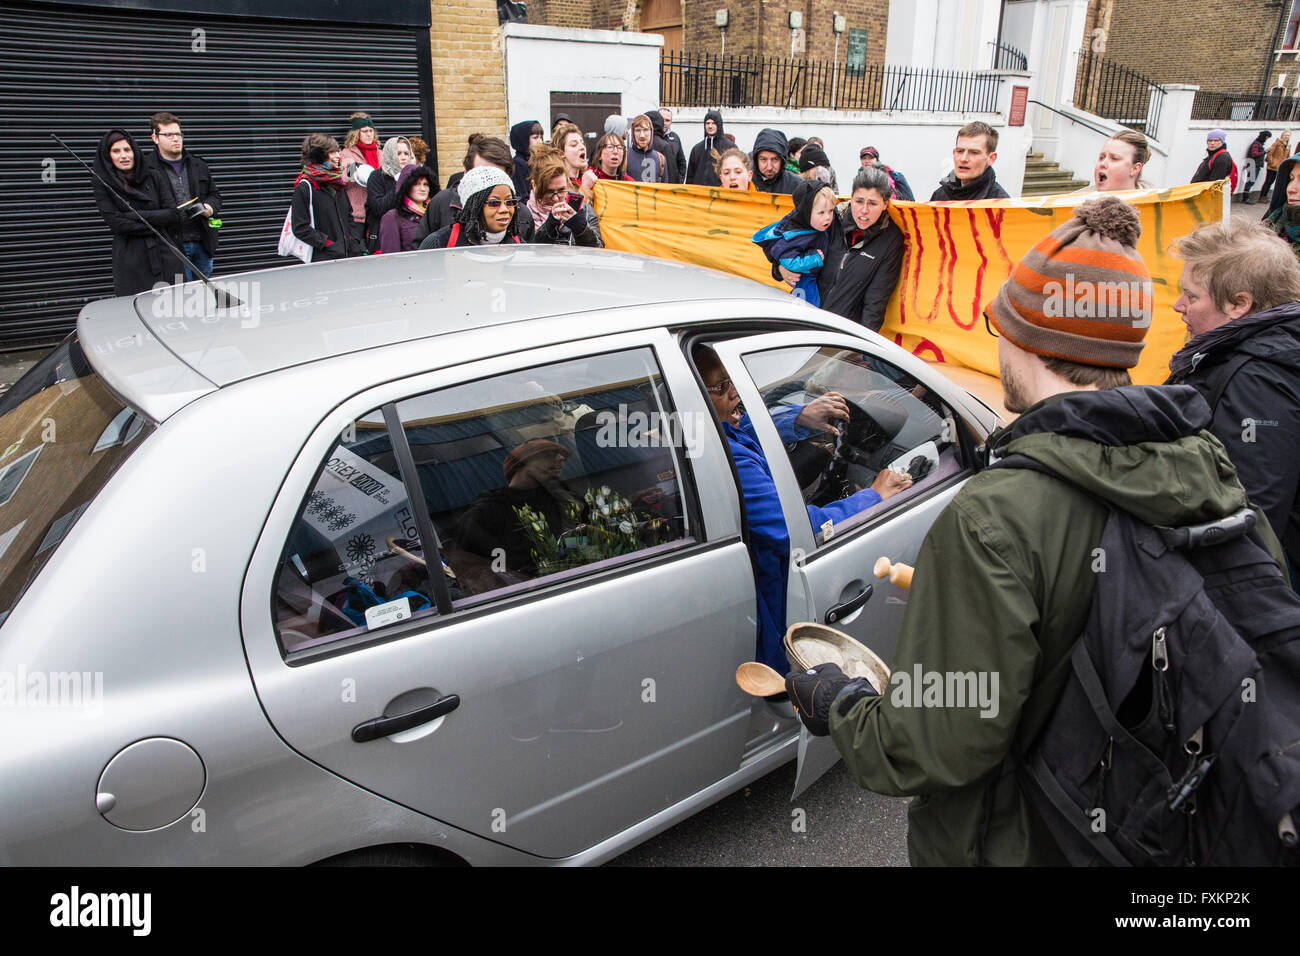 London, UK. 16th April, 2016. The driver of a car delivering items to St Francis of Assisi church in Stratford tries to force her way through a 'reproductive rights' protest by campaigners from feminist, anti-capitalist and LGBT groups outside the church. Campaigners were protesting against recent intimidation of women outside an abortion clinic by faith-based anti-abortionists and a proposed march by them from the church to the abortion clinic. Credit:  Mark Kerrison/Alamy Live News Stock Photo